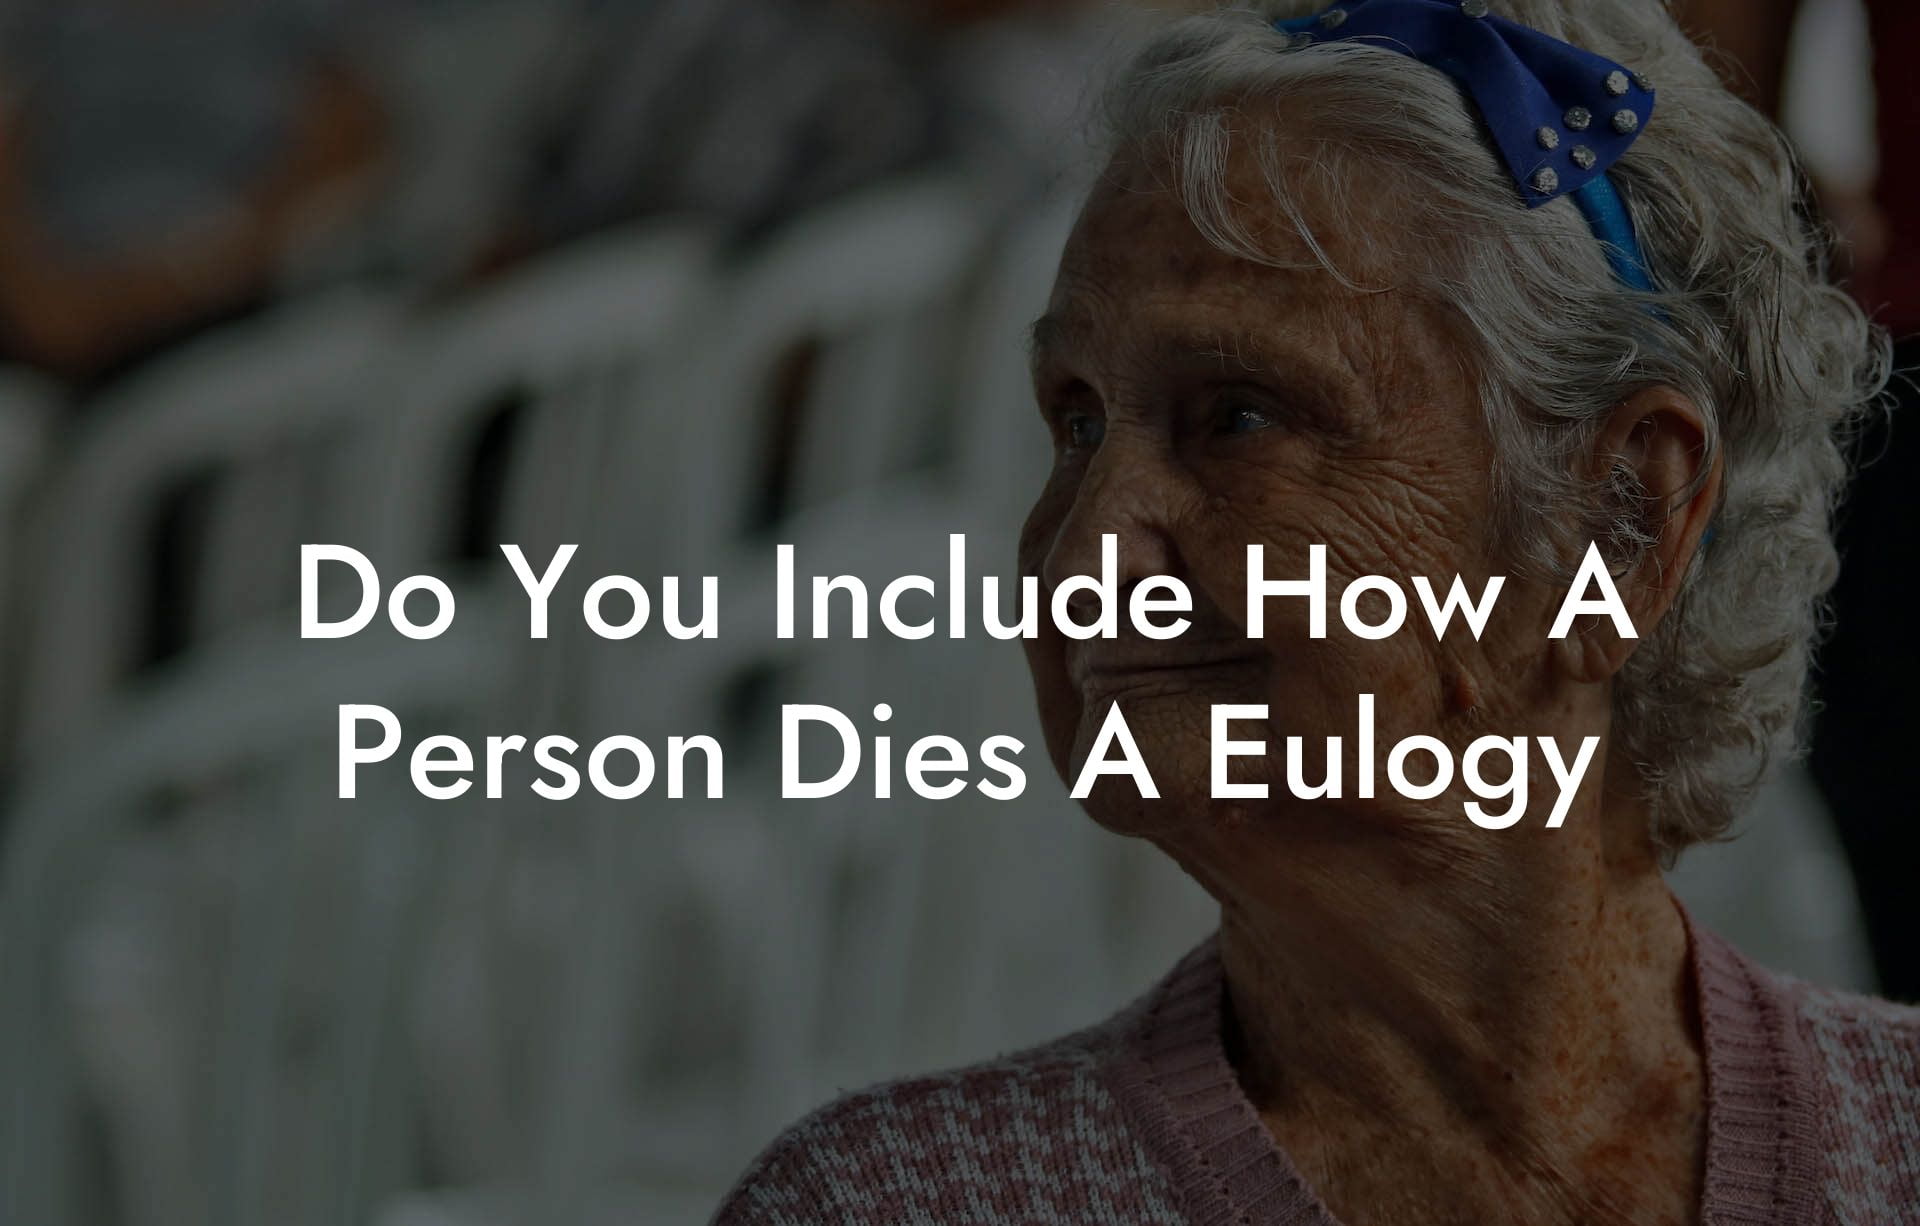 Do You Include How A Person Dies A Eulogy